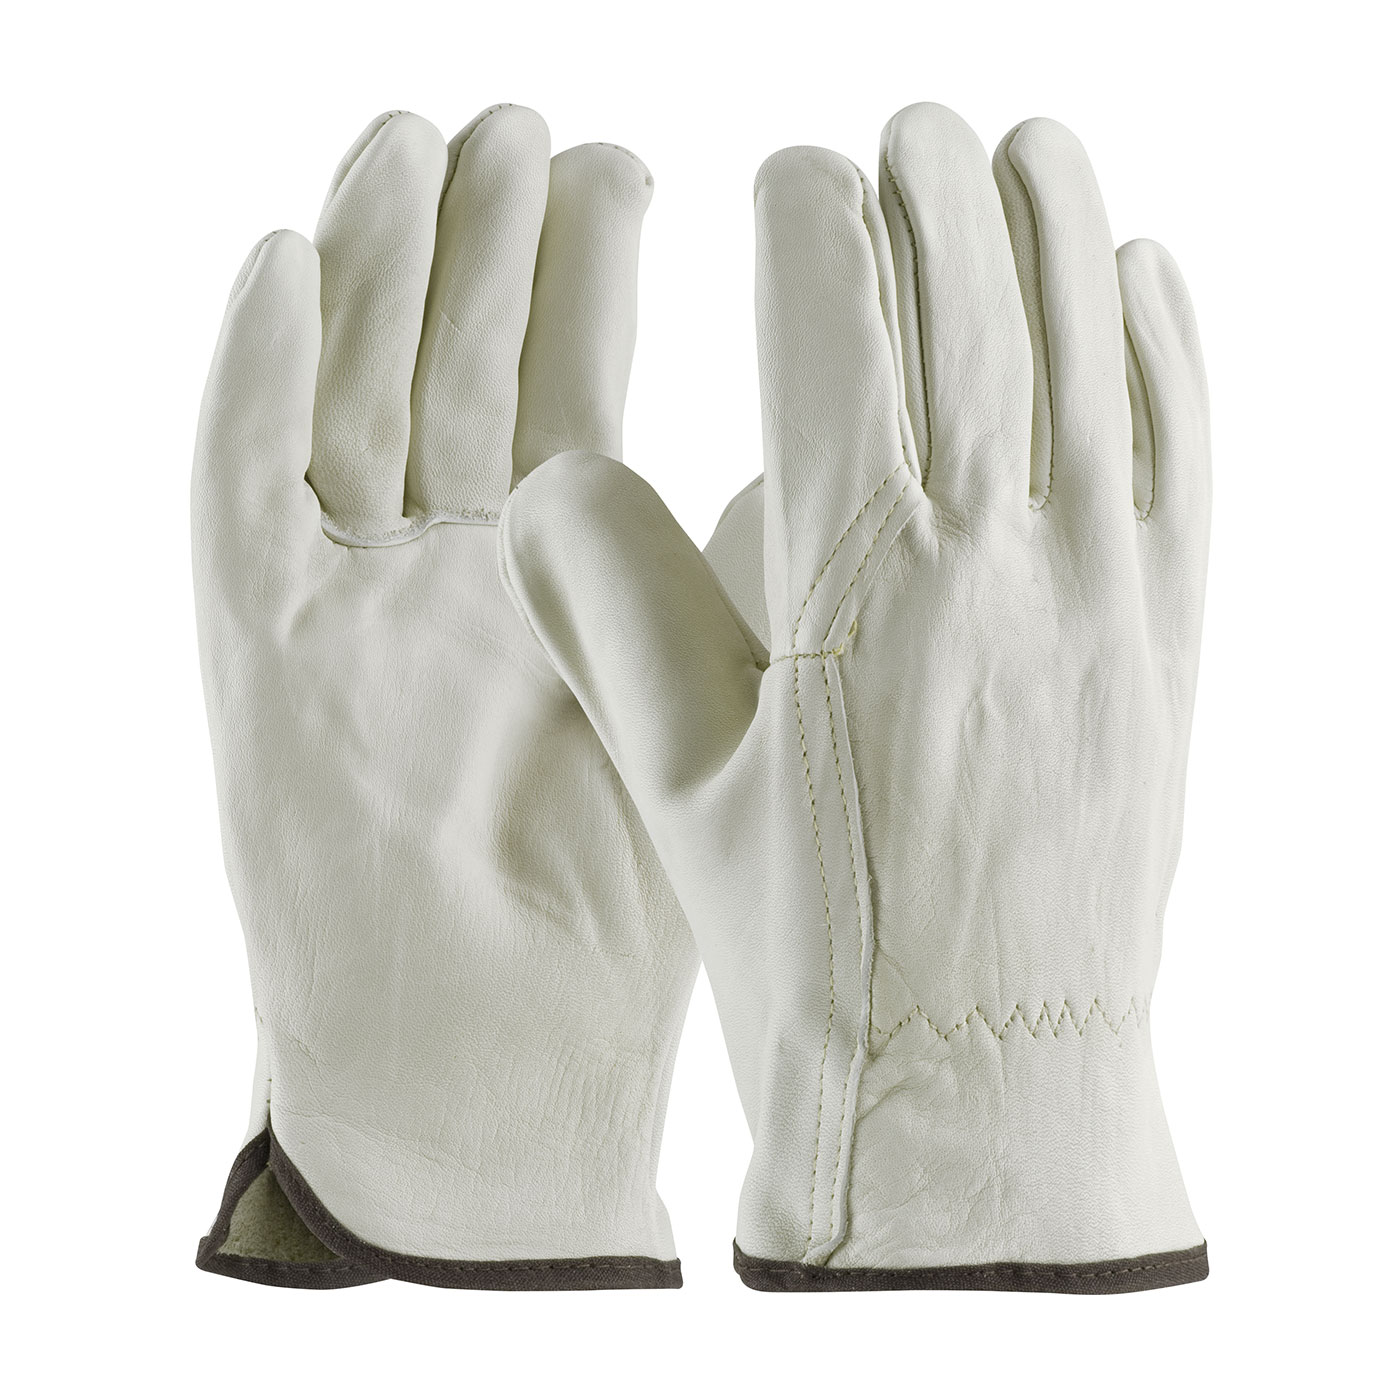 Kevlar Stitched Cowhide Leather Drivers Work Gloves | Premium Top Grain ...